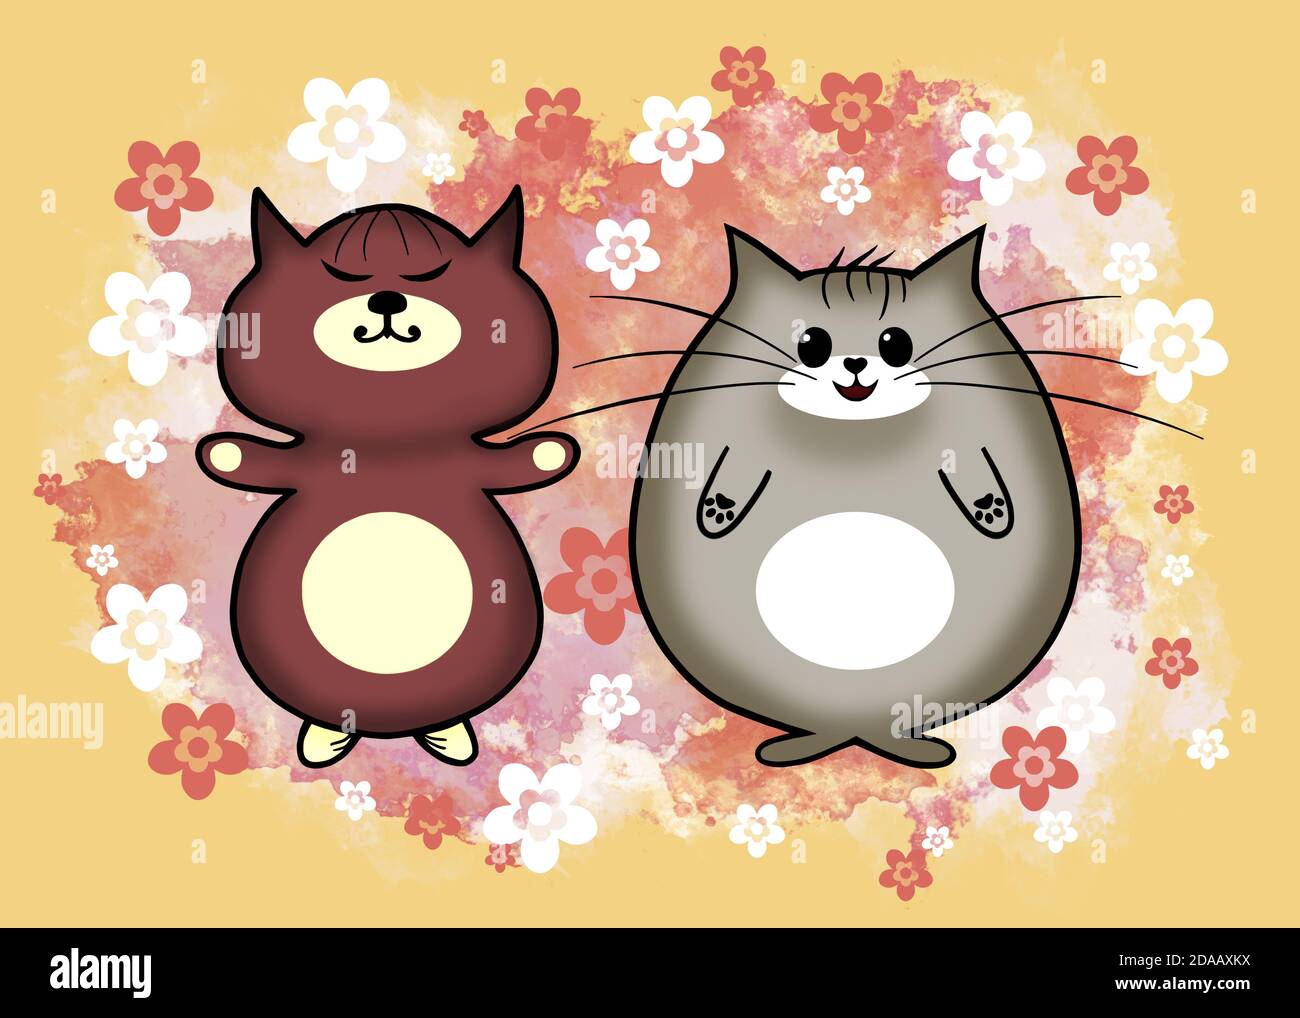 Two funny kawaii cats on a yellow background with brown splashes and flowers. Raster illustration. Stock Photo